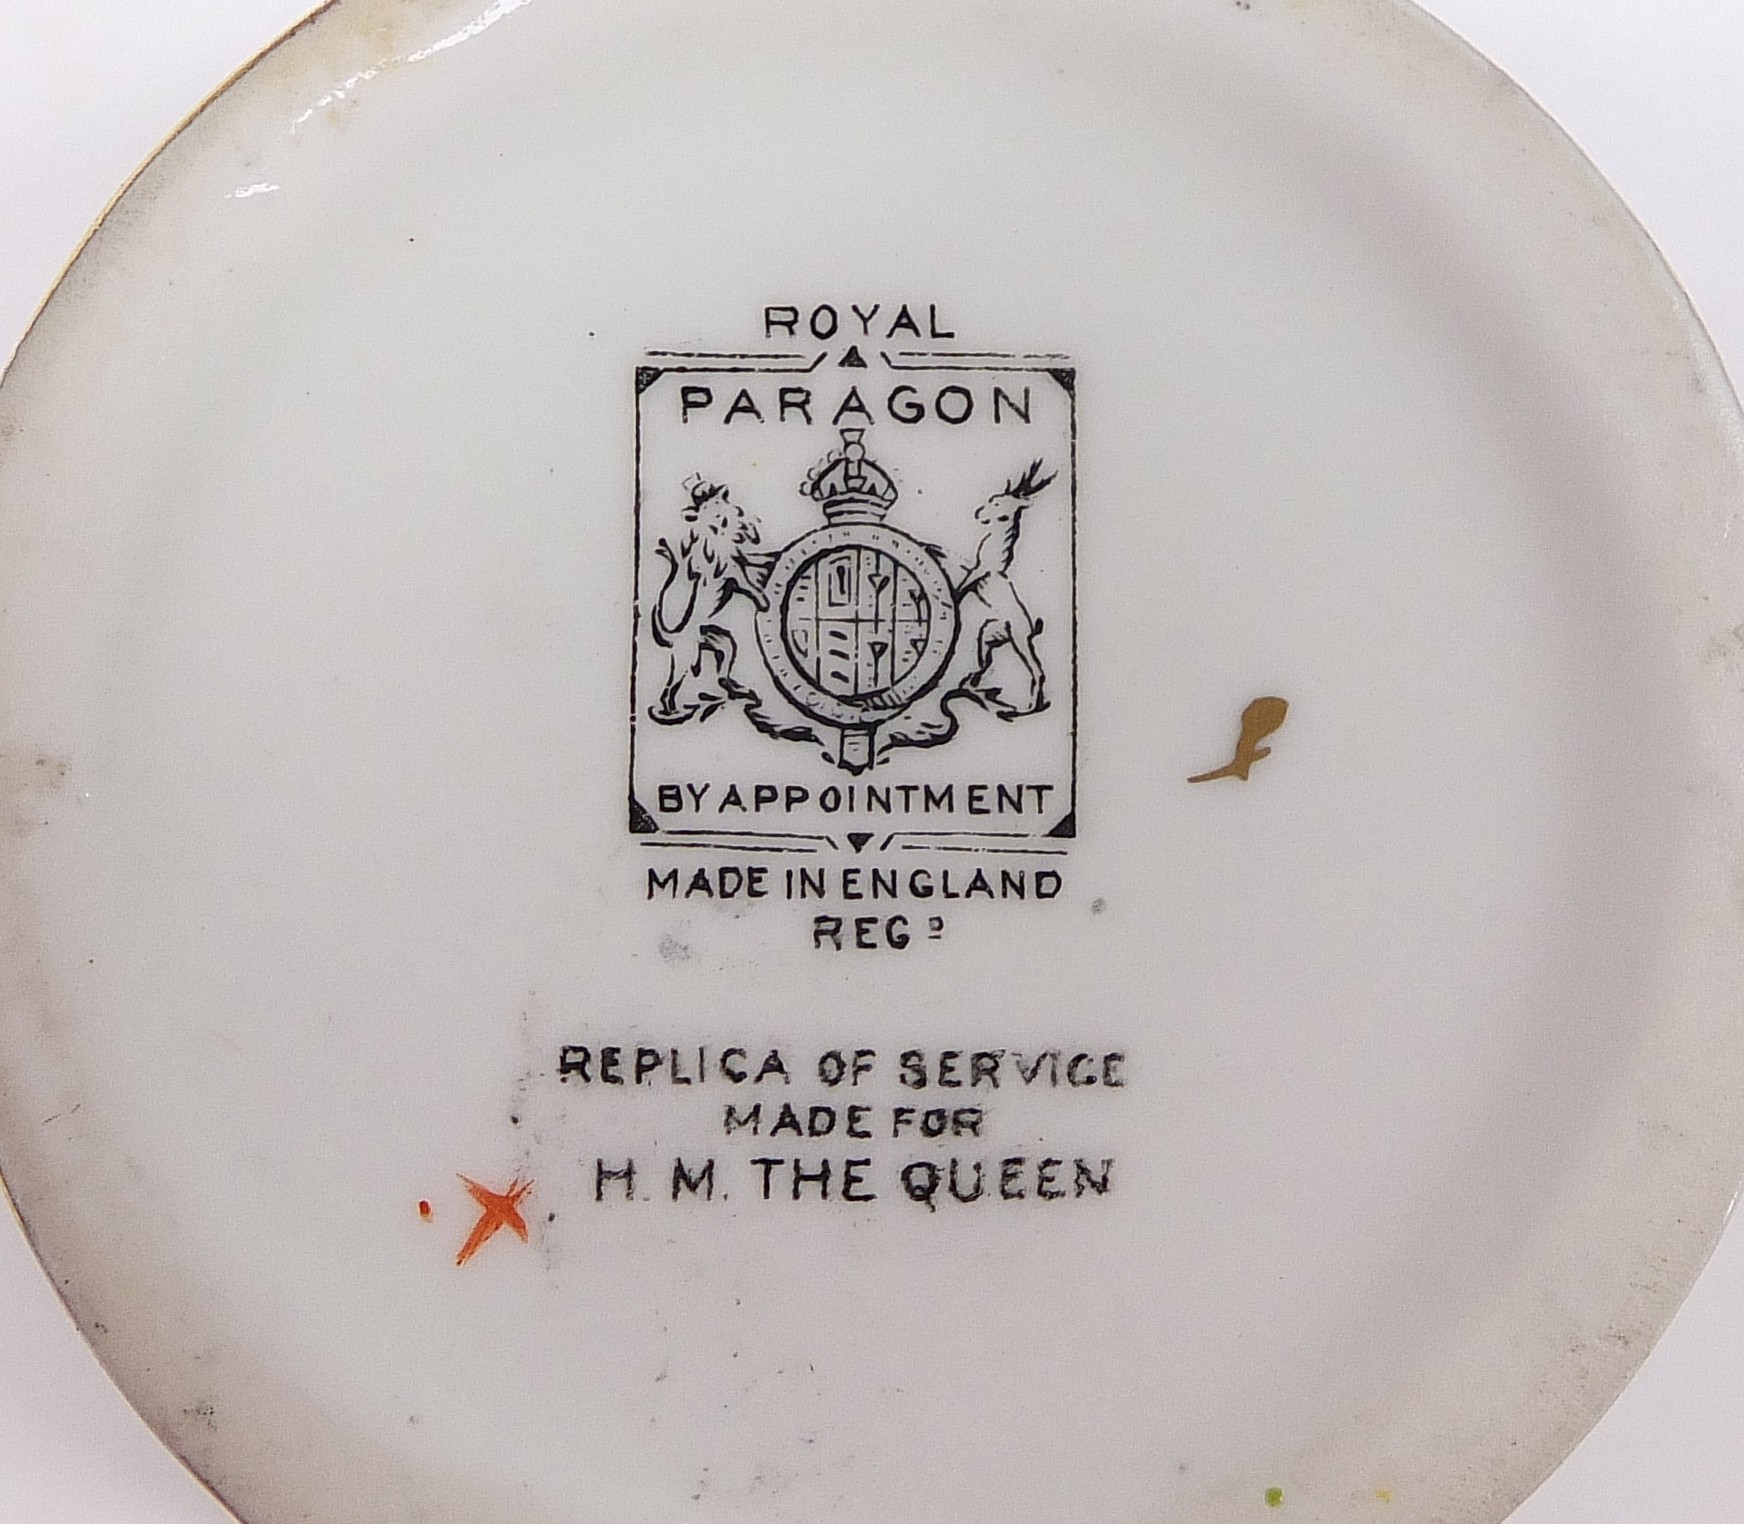 Royal Paragon tea ware, replica of service made for HM The Queen, the largest 25.5cm wide - Image 4 of 4